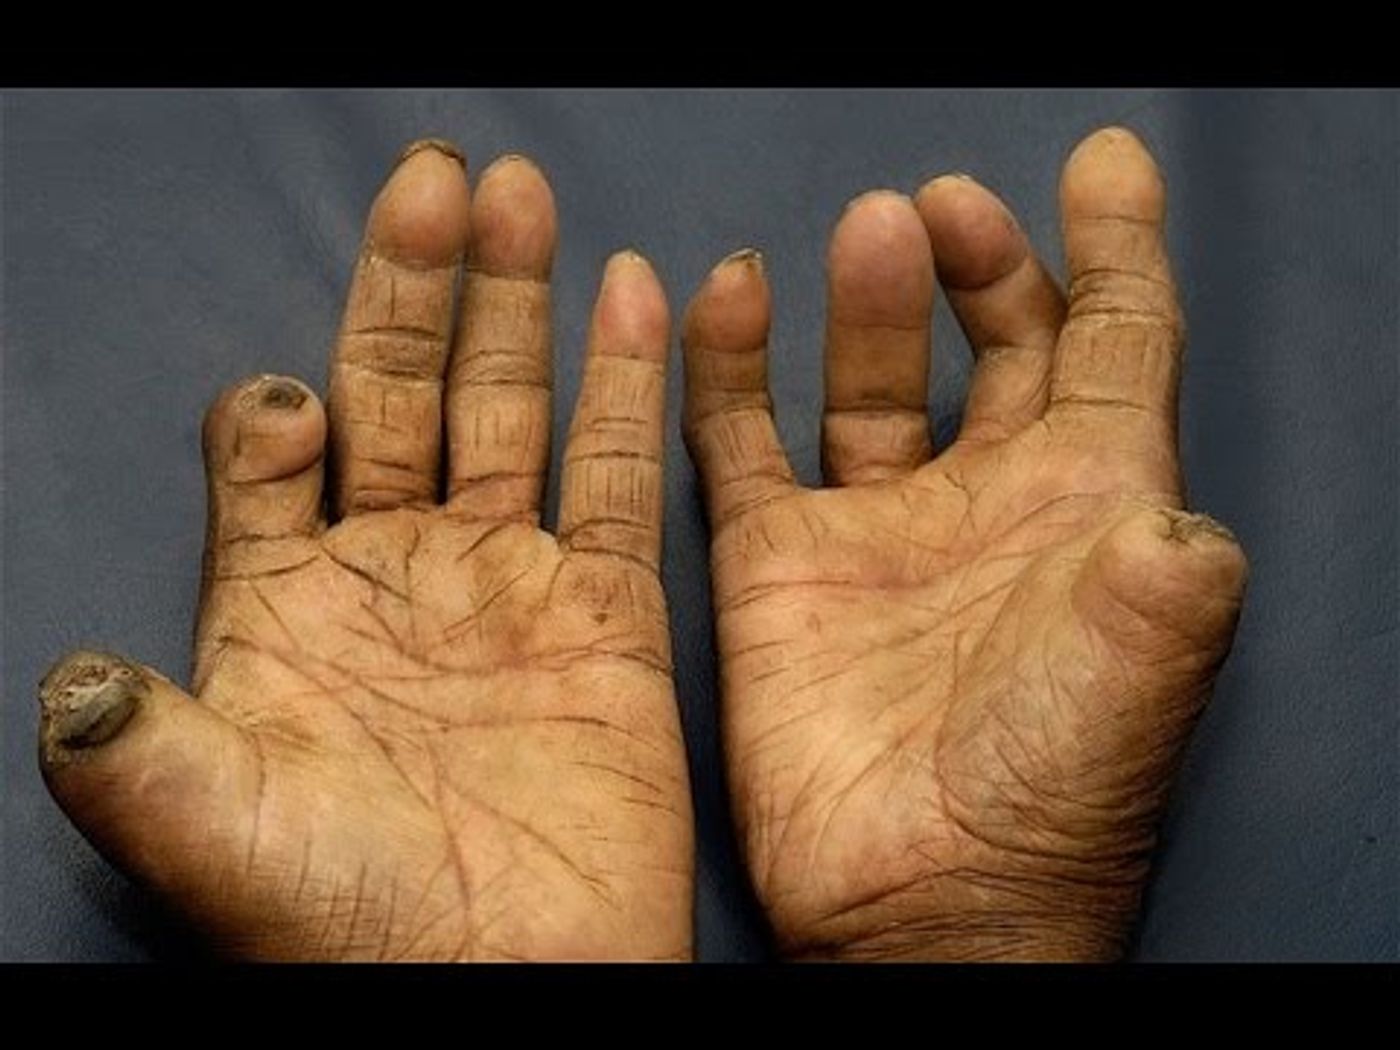 Leprosy damages fingers and toes